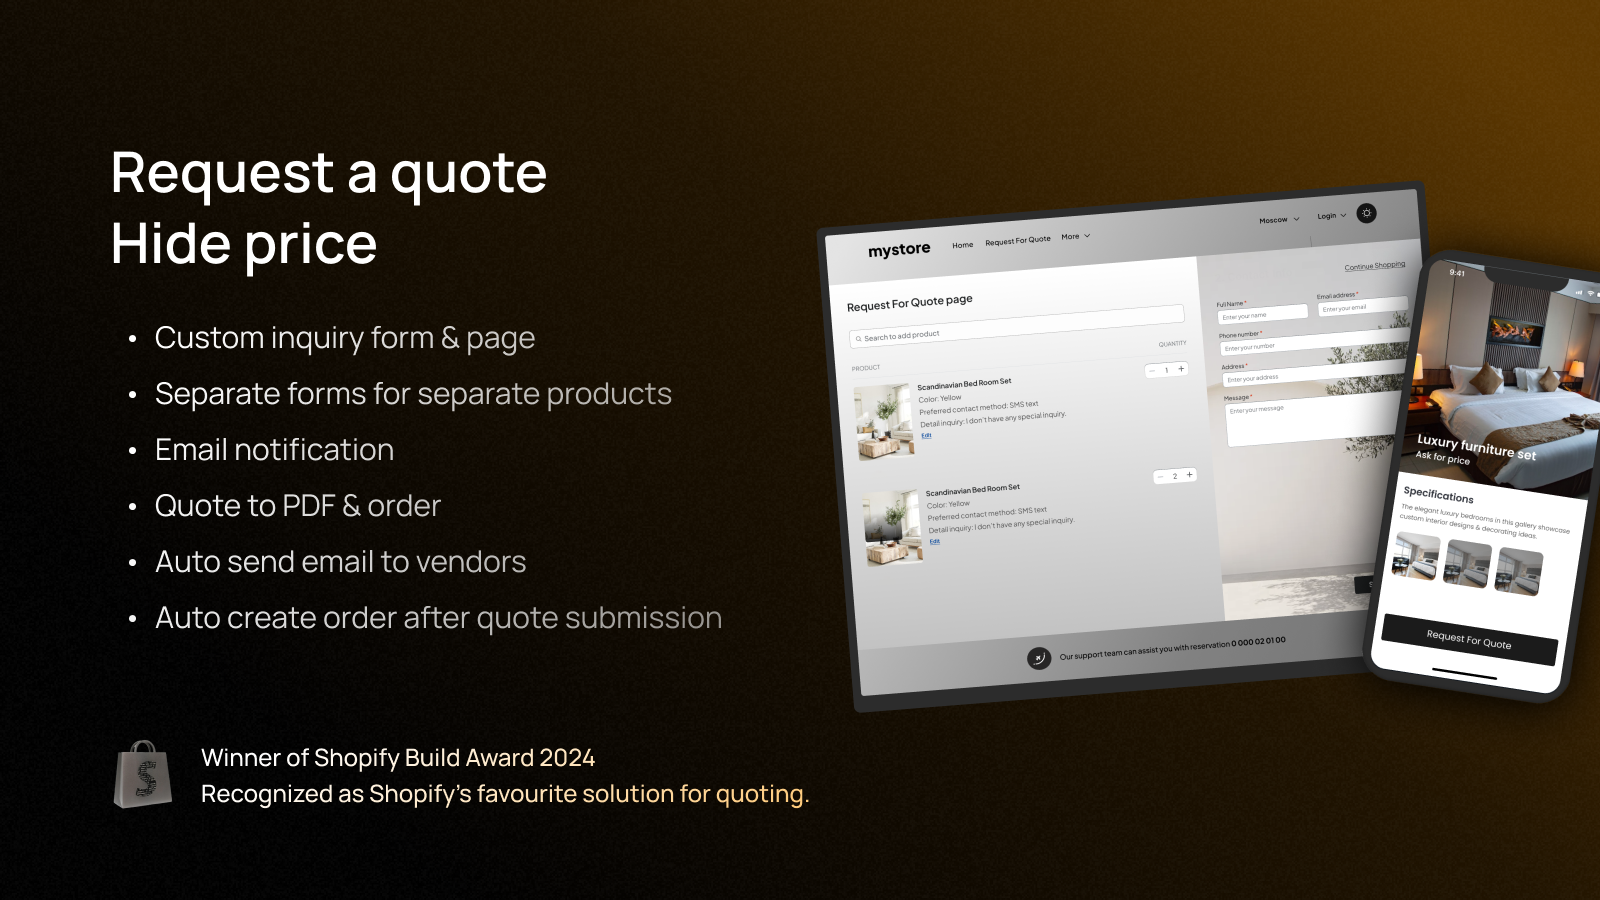 quote snap hide price request a quote B2B contact form